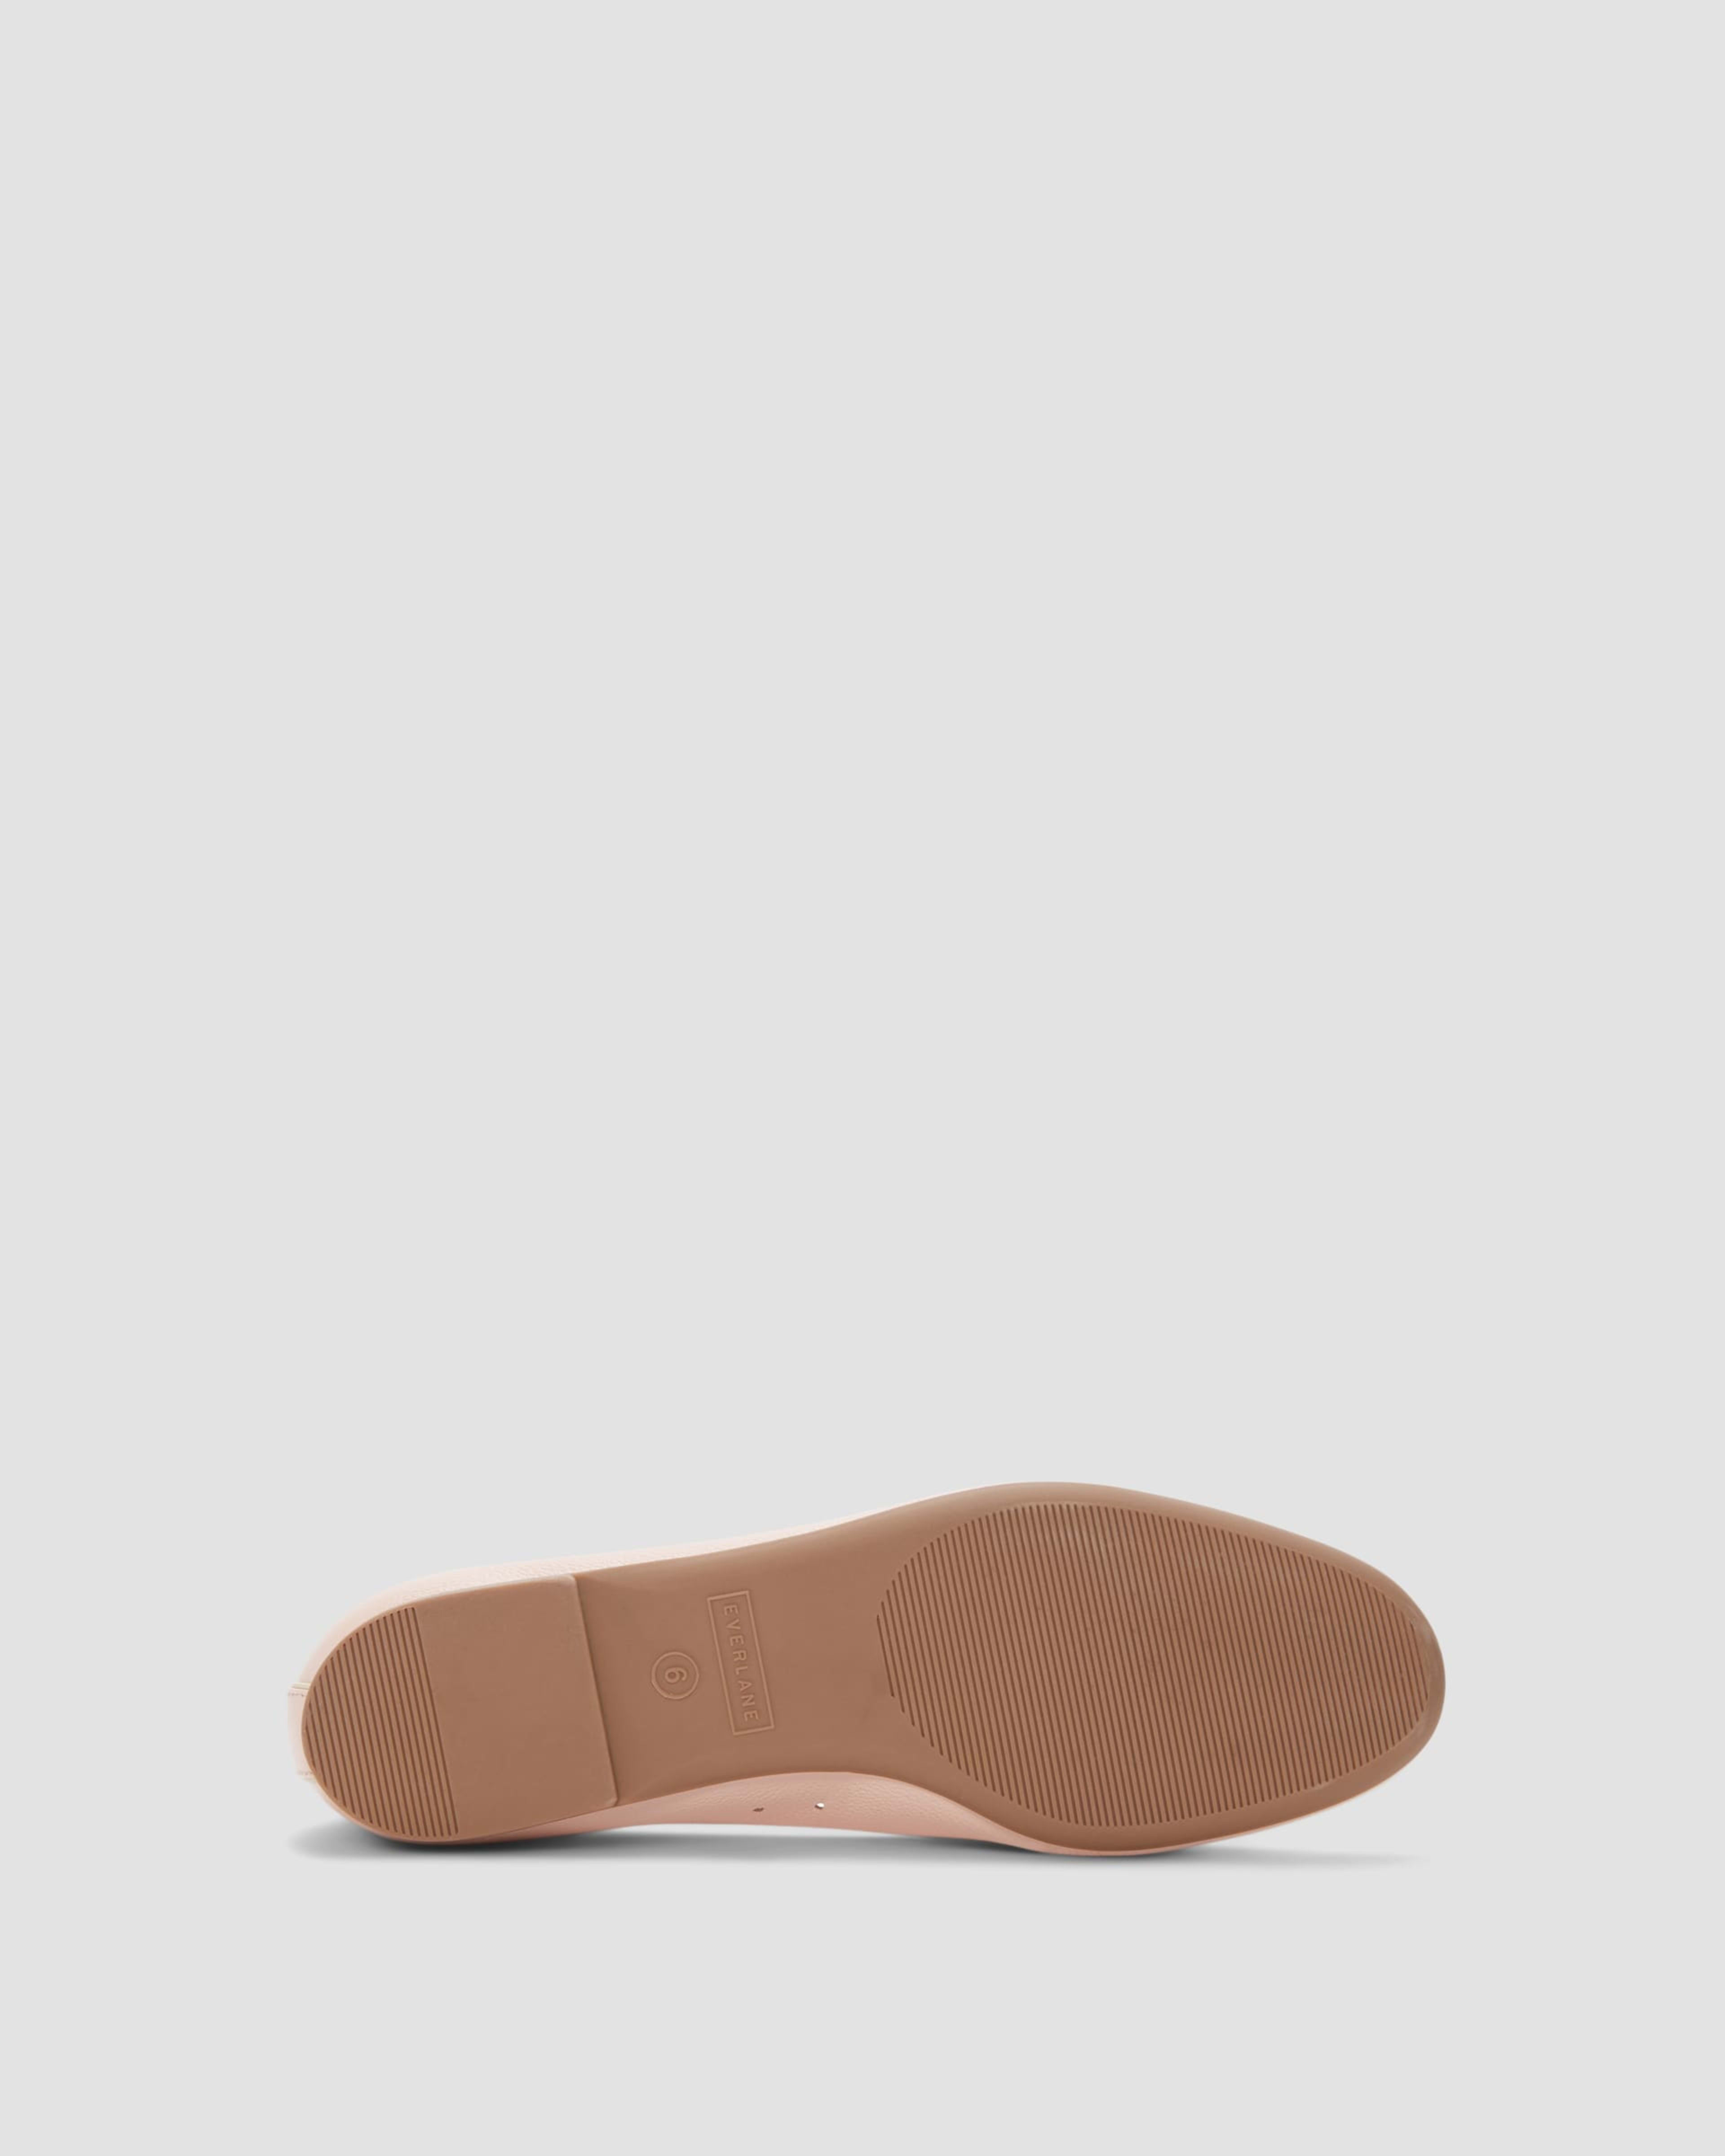 The Day Glove Pale Pink – Everlane